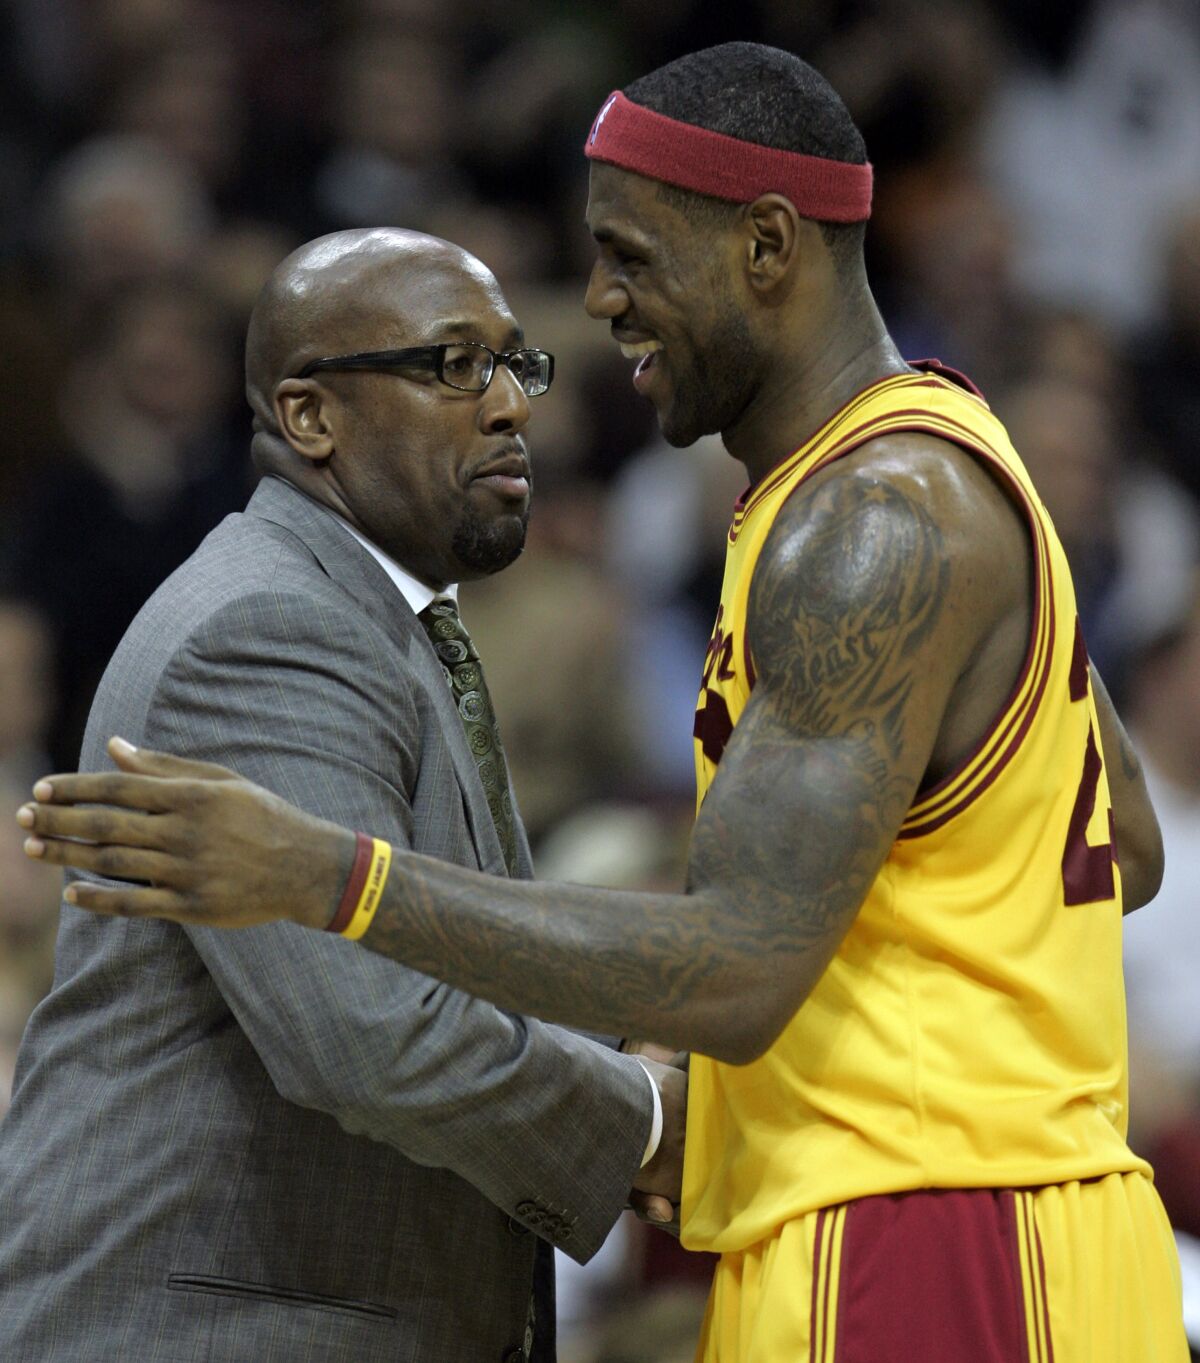 LeBron James smiles as he talks with Cavaliers coach Mike Brown during a game on Dec. 3, 2008, in Cleveland.